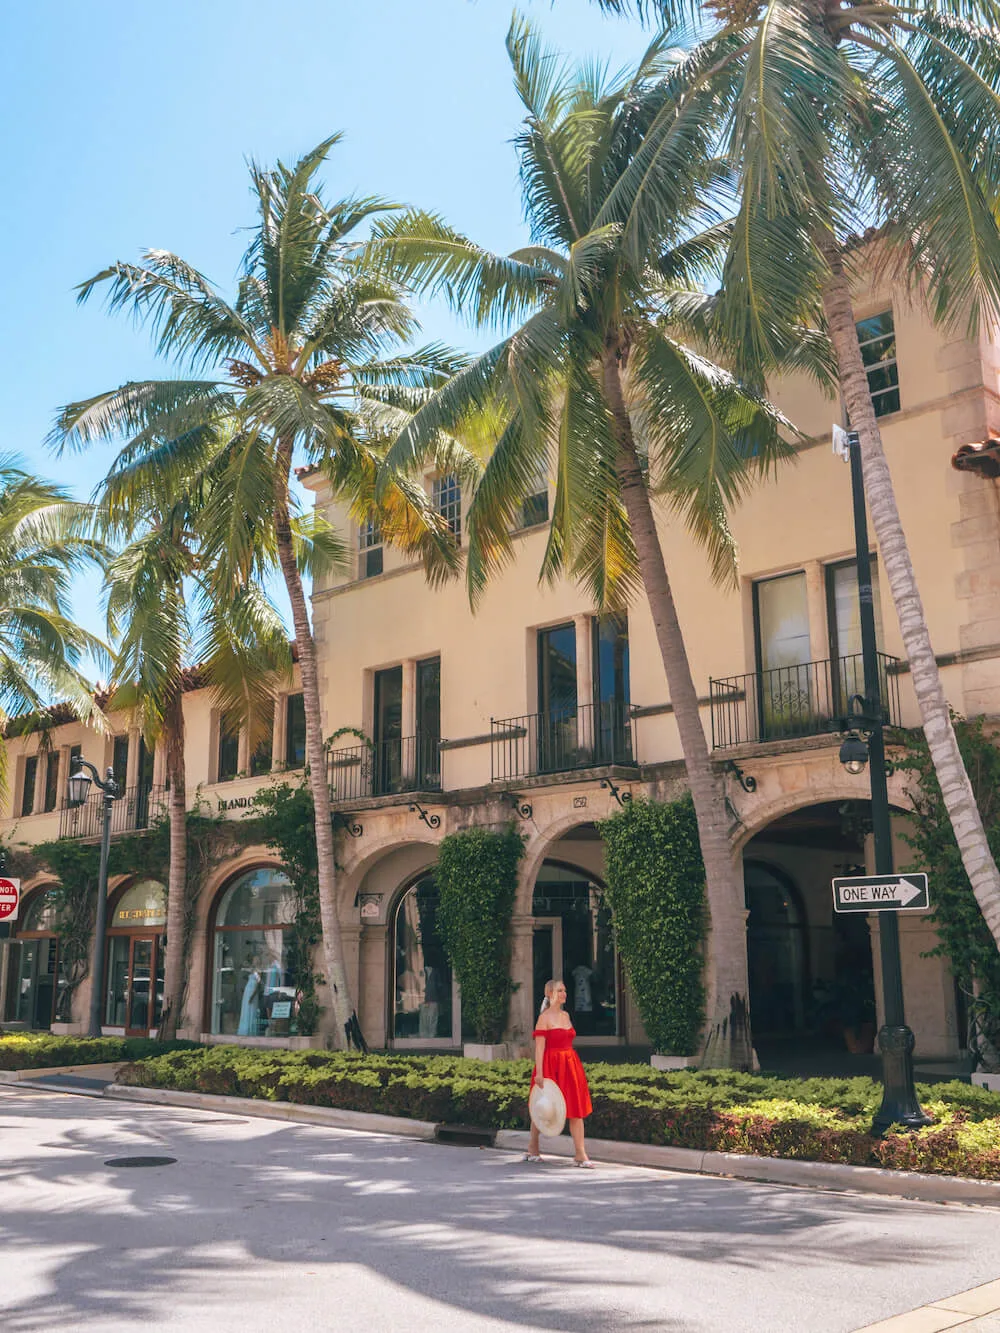 6 Most Instagrammable Locations in Boca Raton - Palm Beach Illustrated